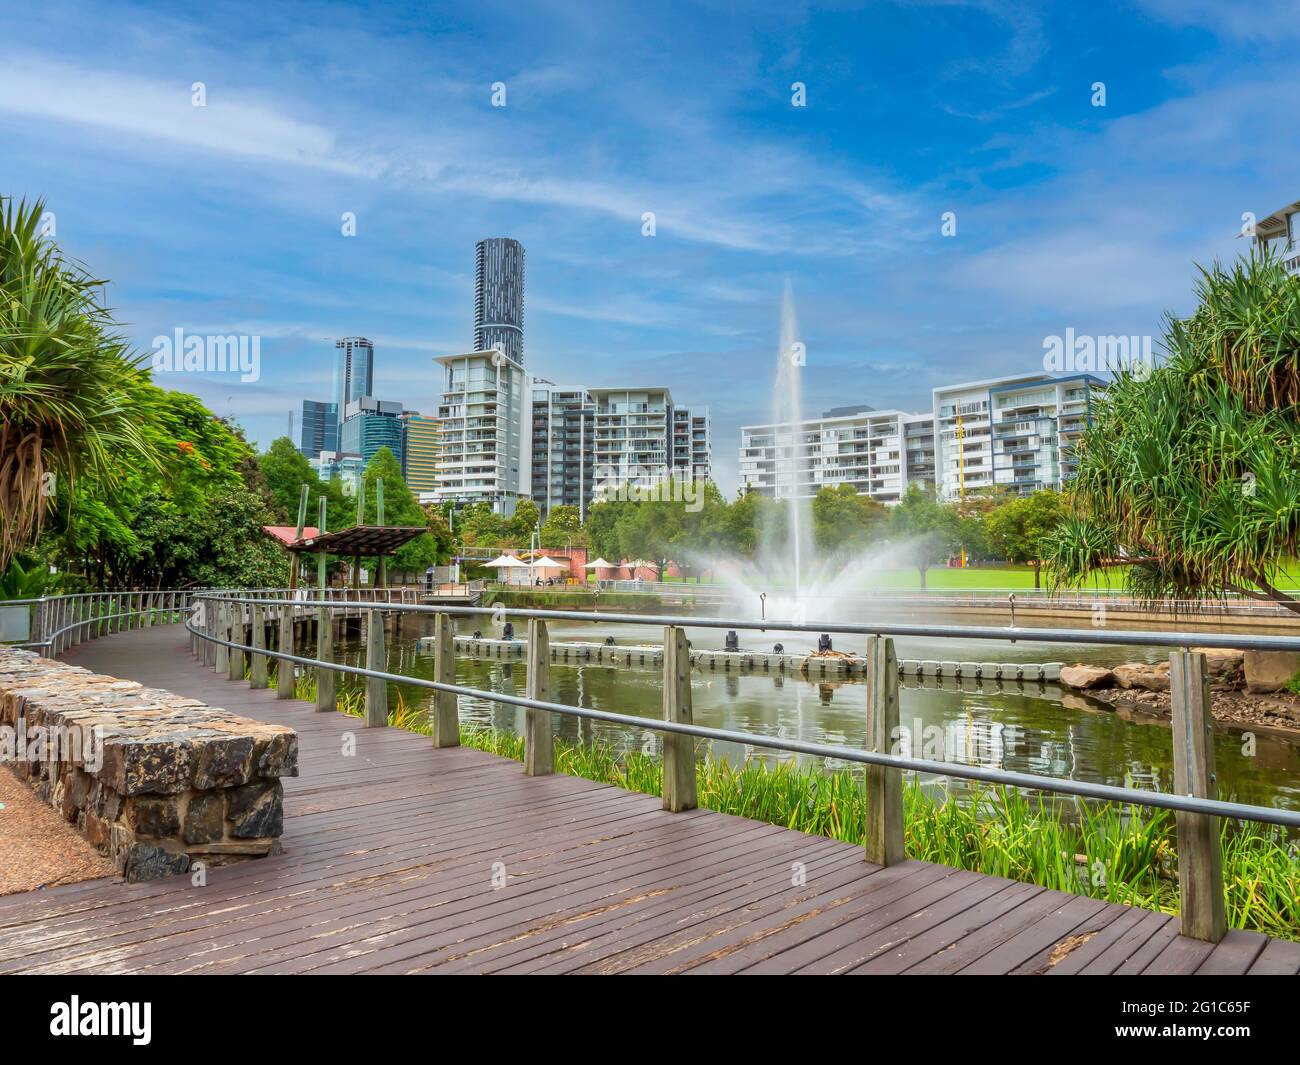 Park lands and apartment building at Roma Street in Brisbane, Australia. Fountain and lake, residential and office buildings in the background. Stock Photo